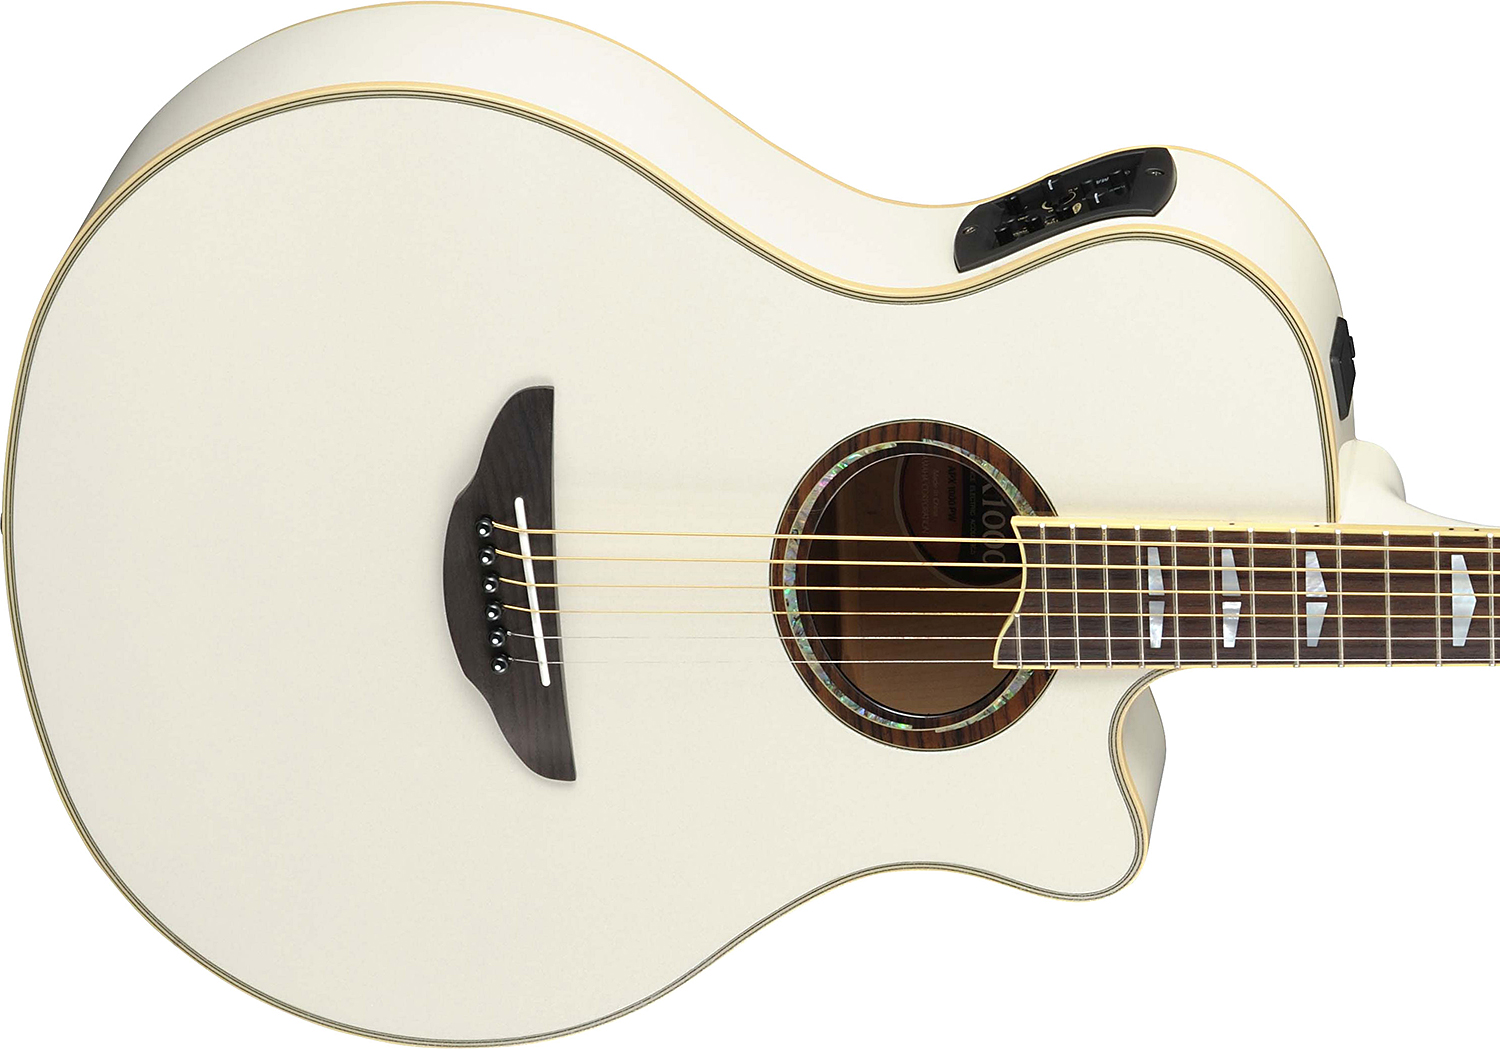 Yamaha Apx1000 Pearl White - Pearl White - Guitare Electro Acoustique - Variation 2